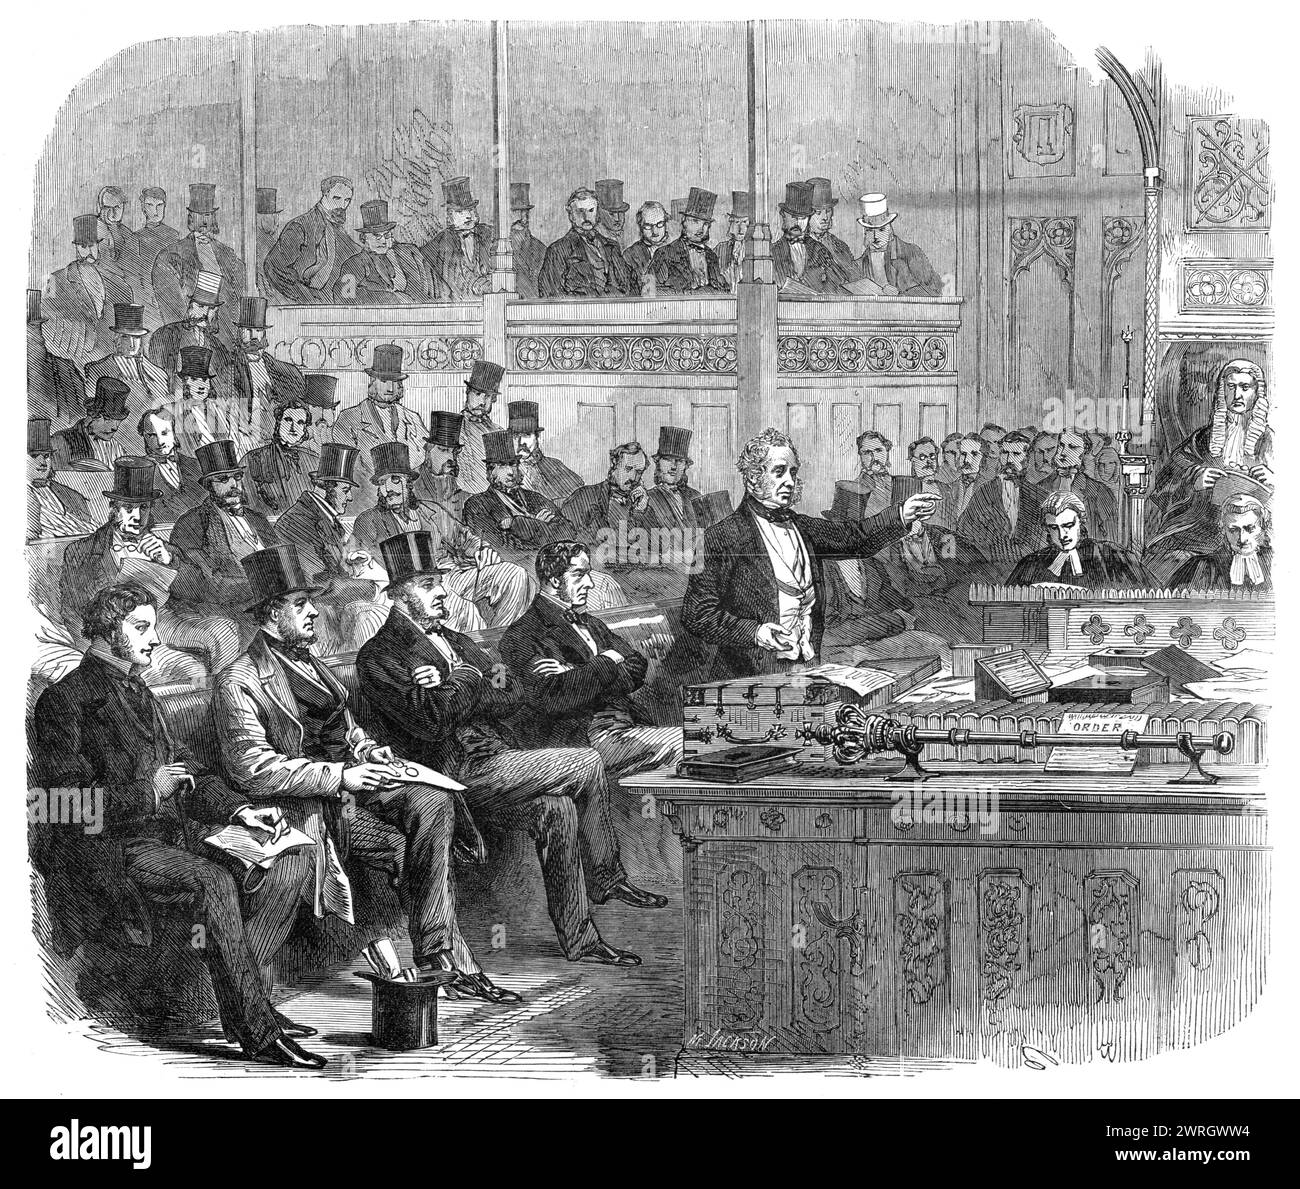 Lord Palmerston making the ministerial statement on Dano-German Affairs in the House of Commons on Monday, 1864. 'Every seat in the body of the house, and the very steps in each gangway, were occupied...[by] persons anxious to obtain the first intelligence of the decision of the Government on the Danish question...[Prime minister] Lord Palmerston...proceeded to give an outline of the circumstances which had led to the Treaty of 1852, and to the subsequent events down to the invasion of Schleswig. Up to that occurrence, he observed, all the parties to the Treaty of 1852, not excepting Prussia, Stock Photo